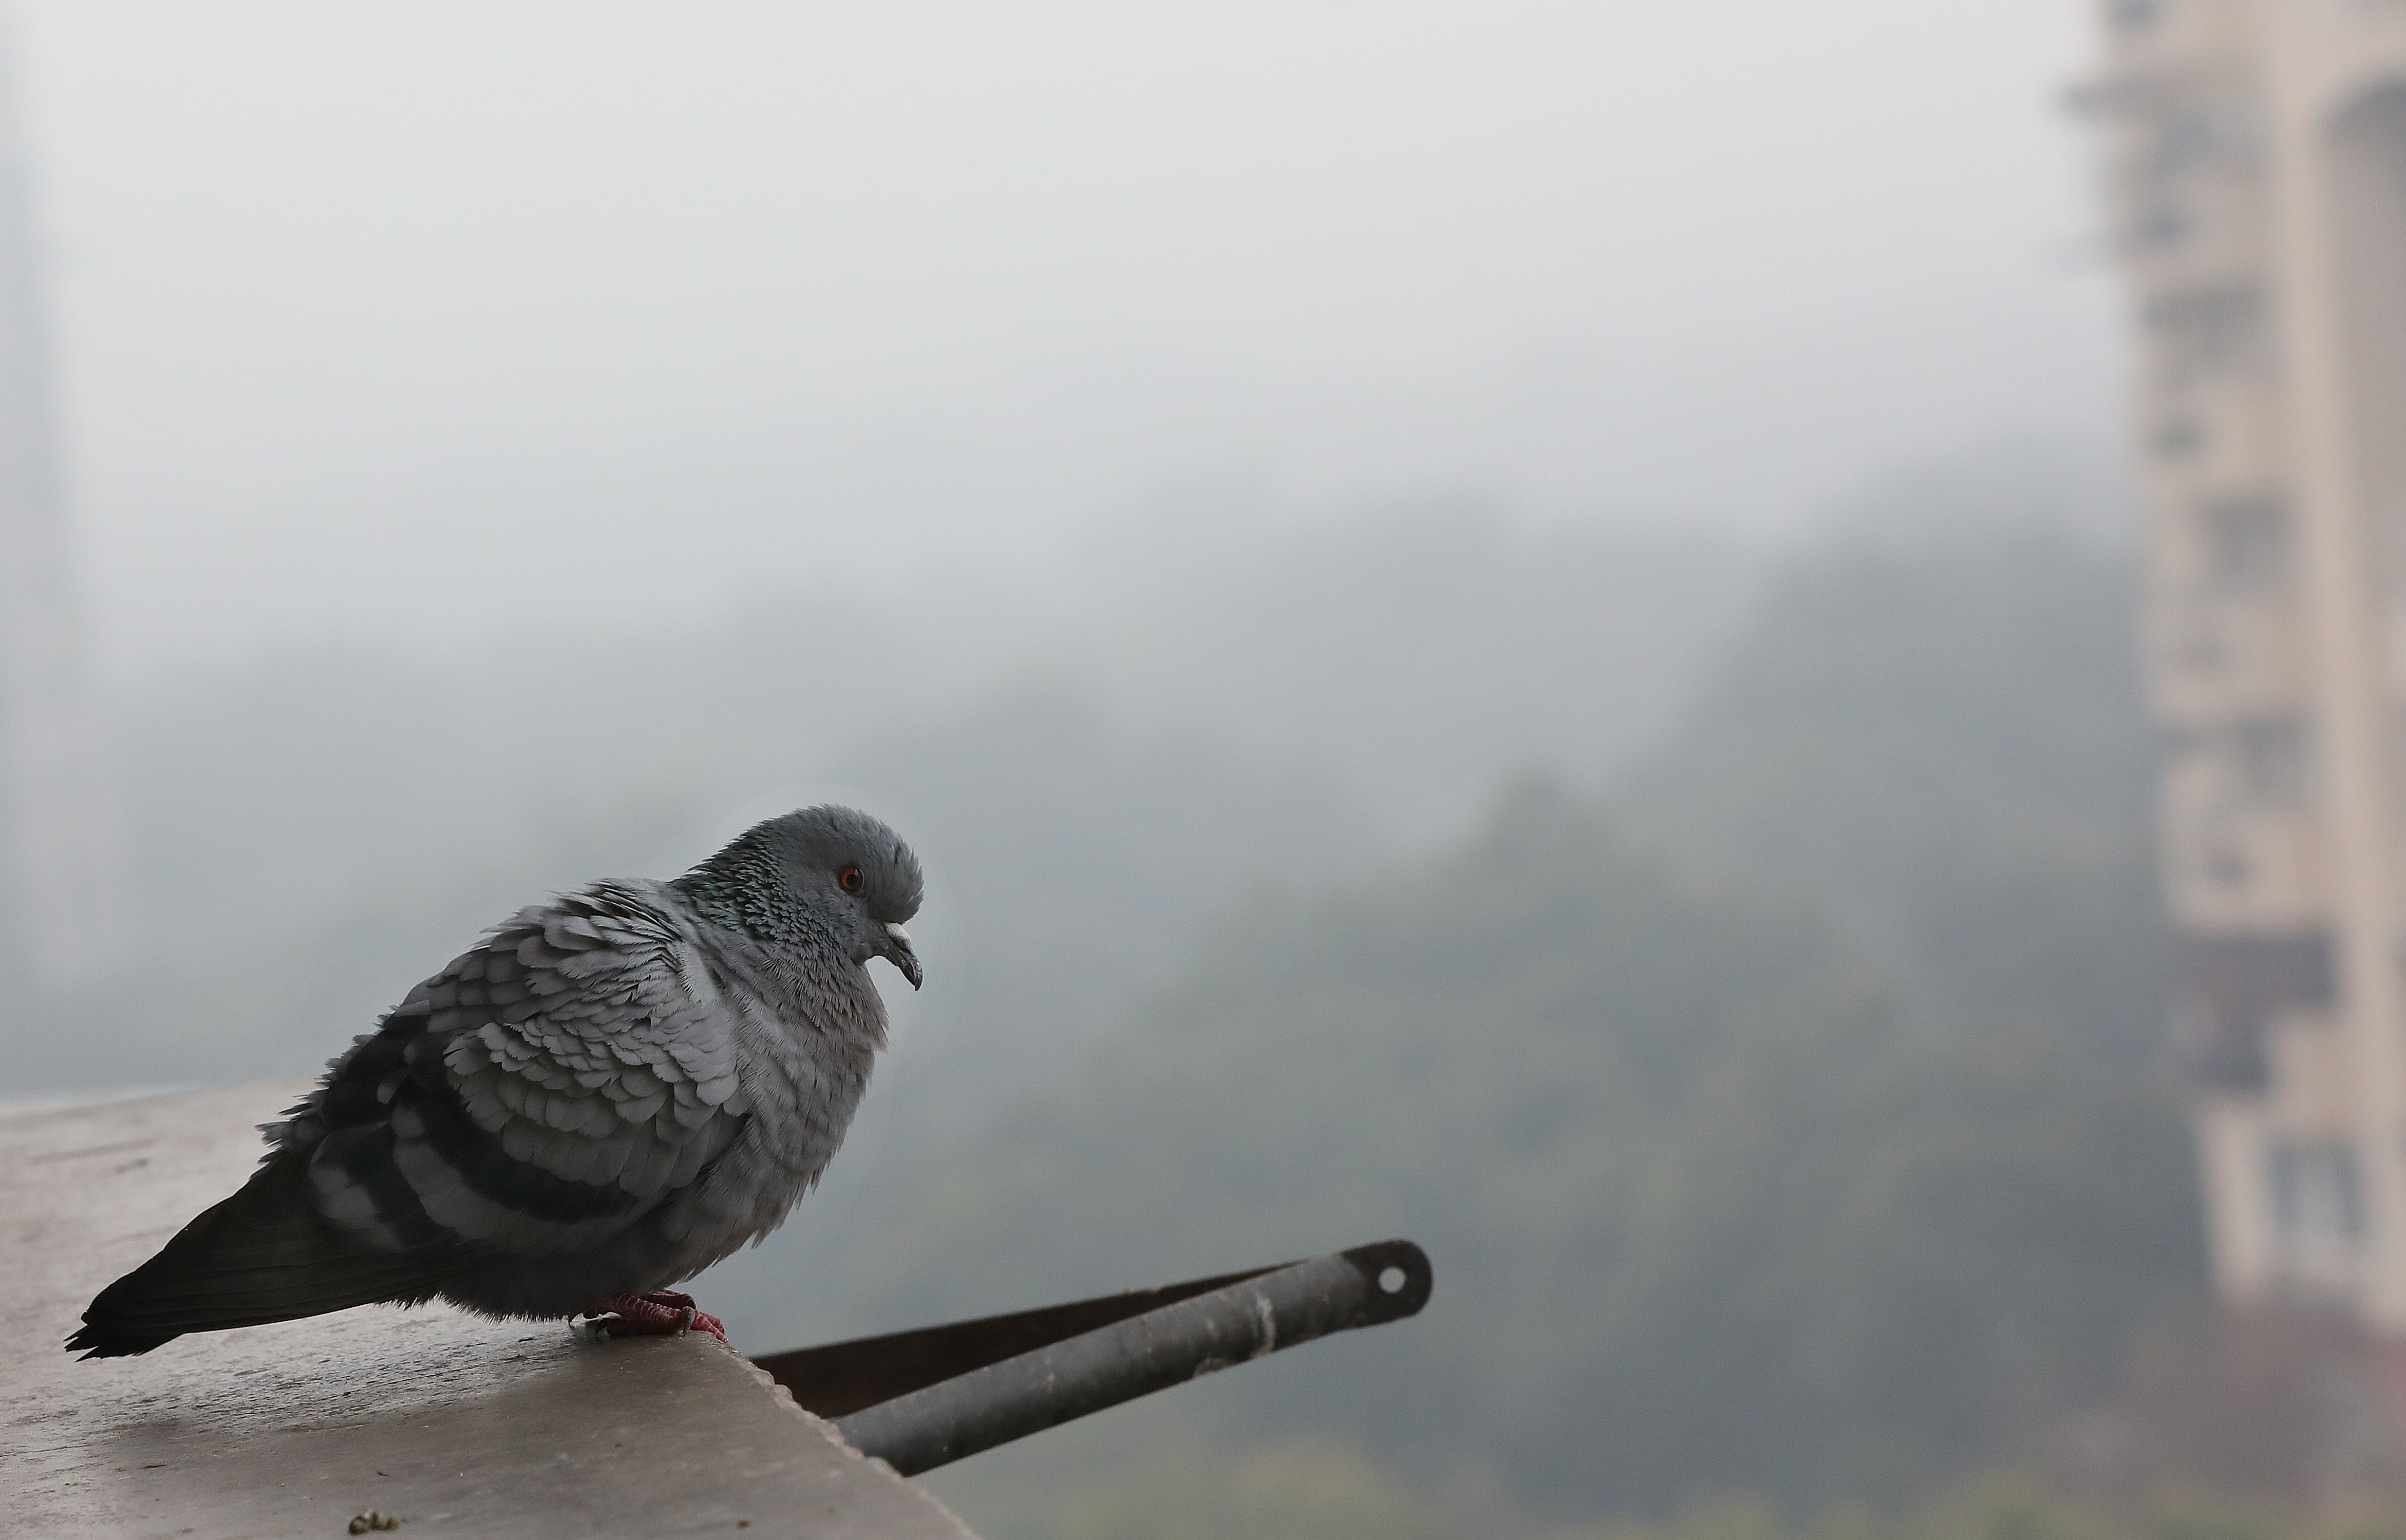 A common pigeon also known as blue rock pigeon sits on a roof during the wintry and foggy morning in New Delhi, India 05 February 2022. EPA-EFE/HARISH TYAGI